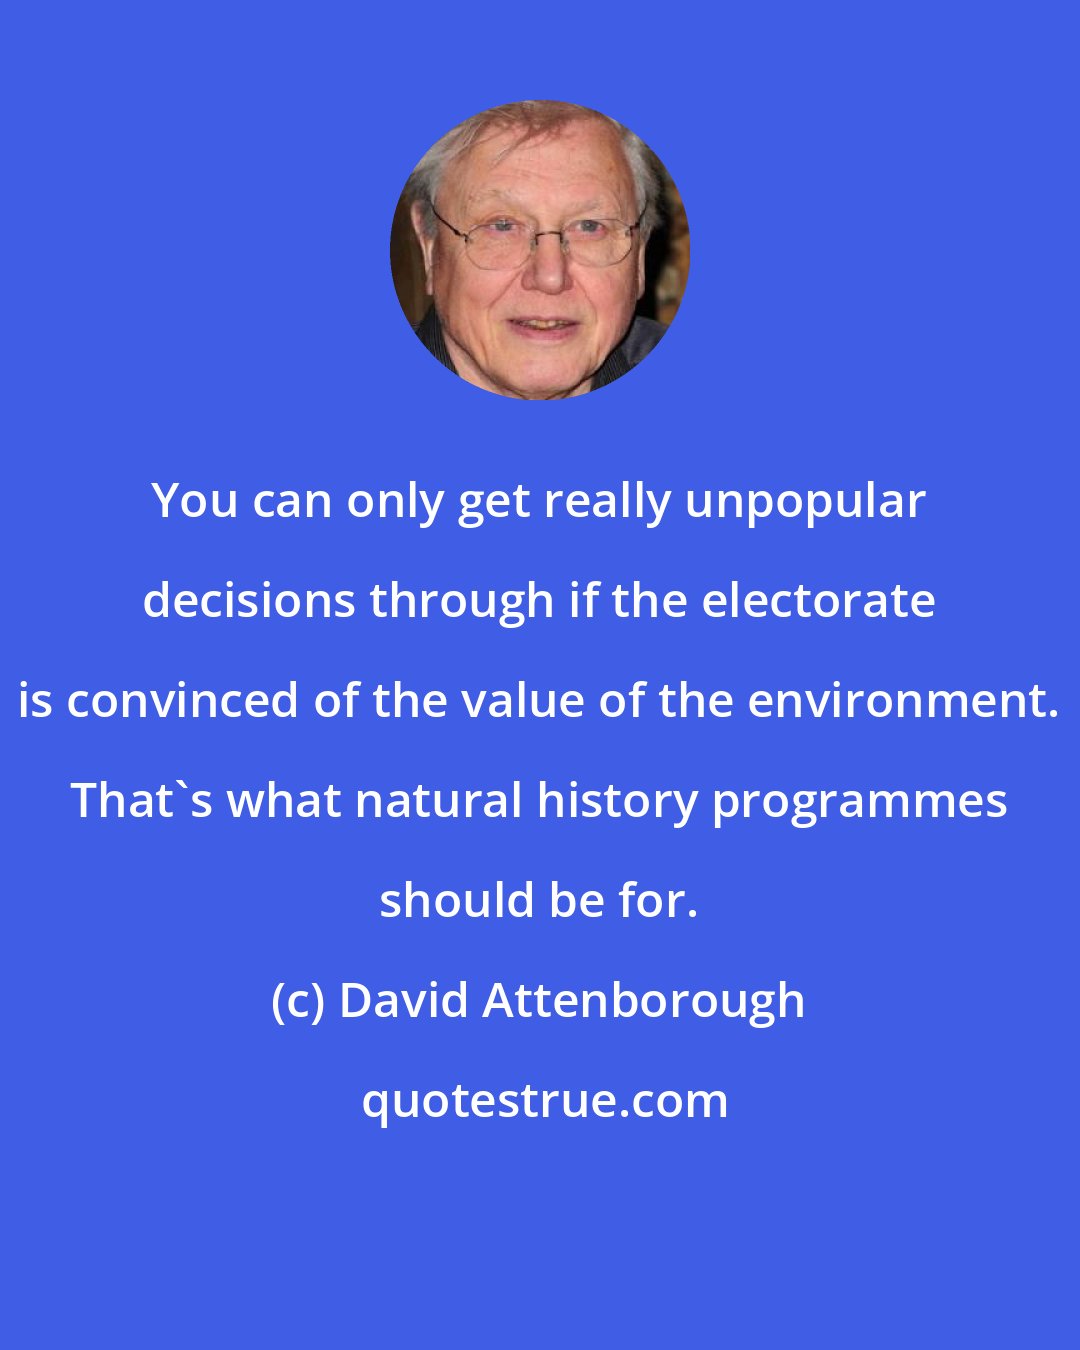 David Attenborough: You can only get really unpopular decisions through if the electorate is convinced of the value of the environment. That's what natural history programmes should be for.